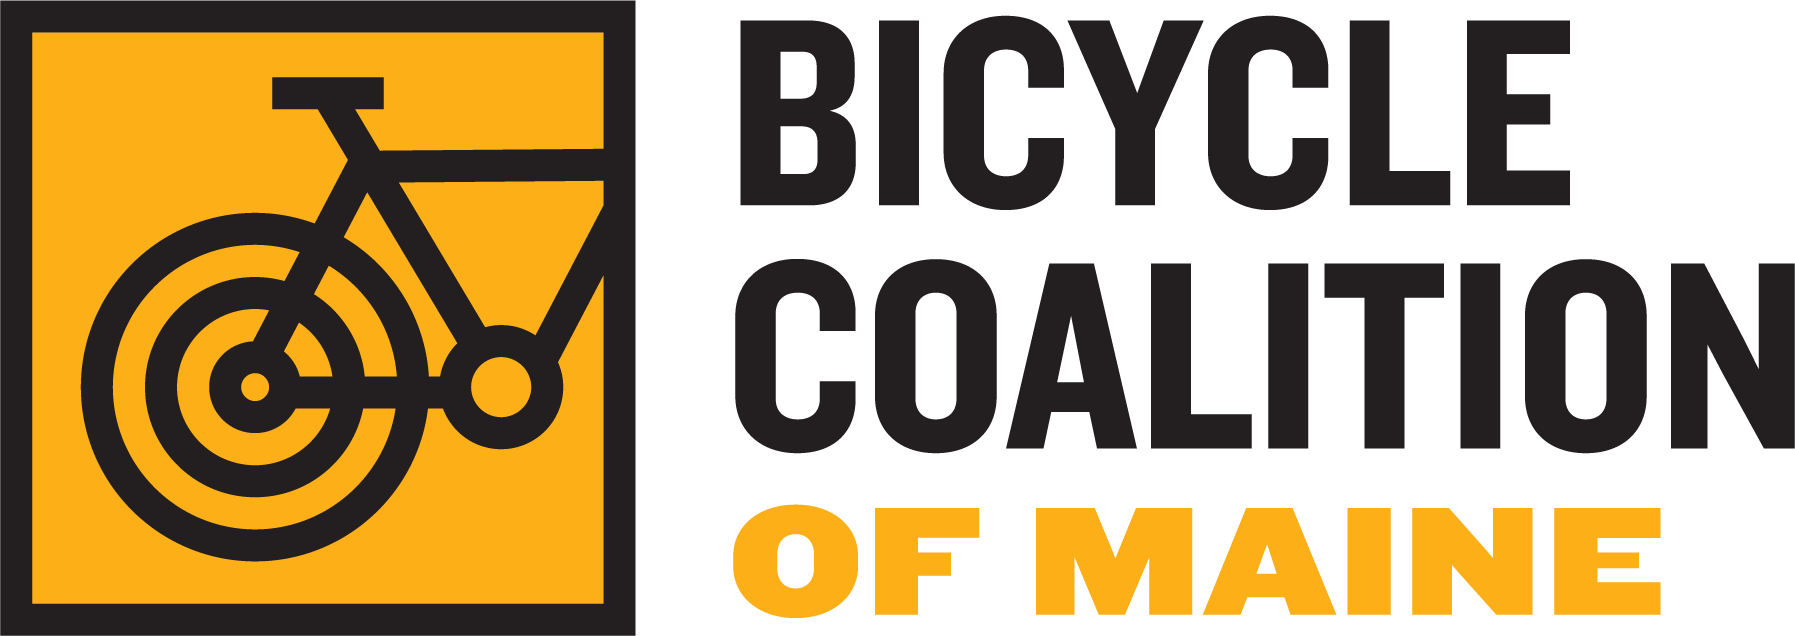 Bicycle Coalition of Maine